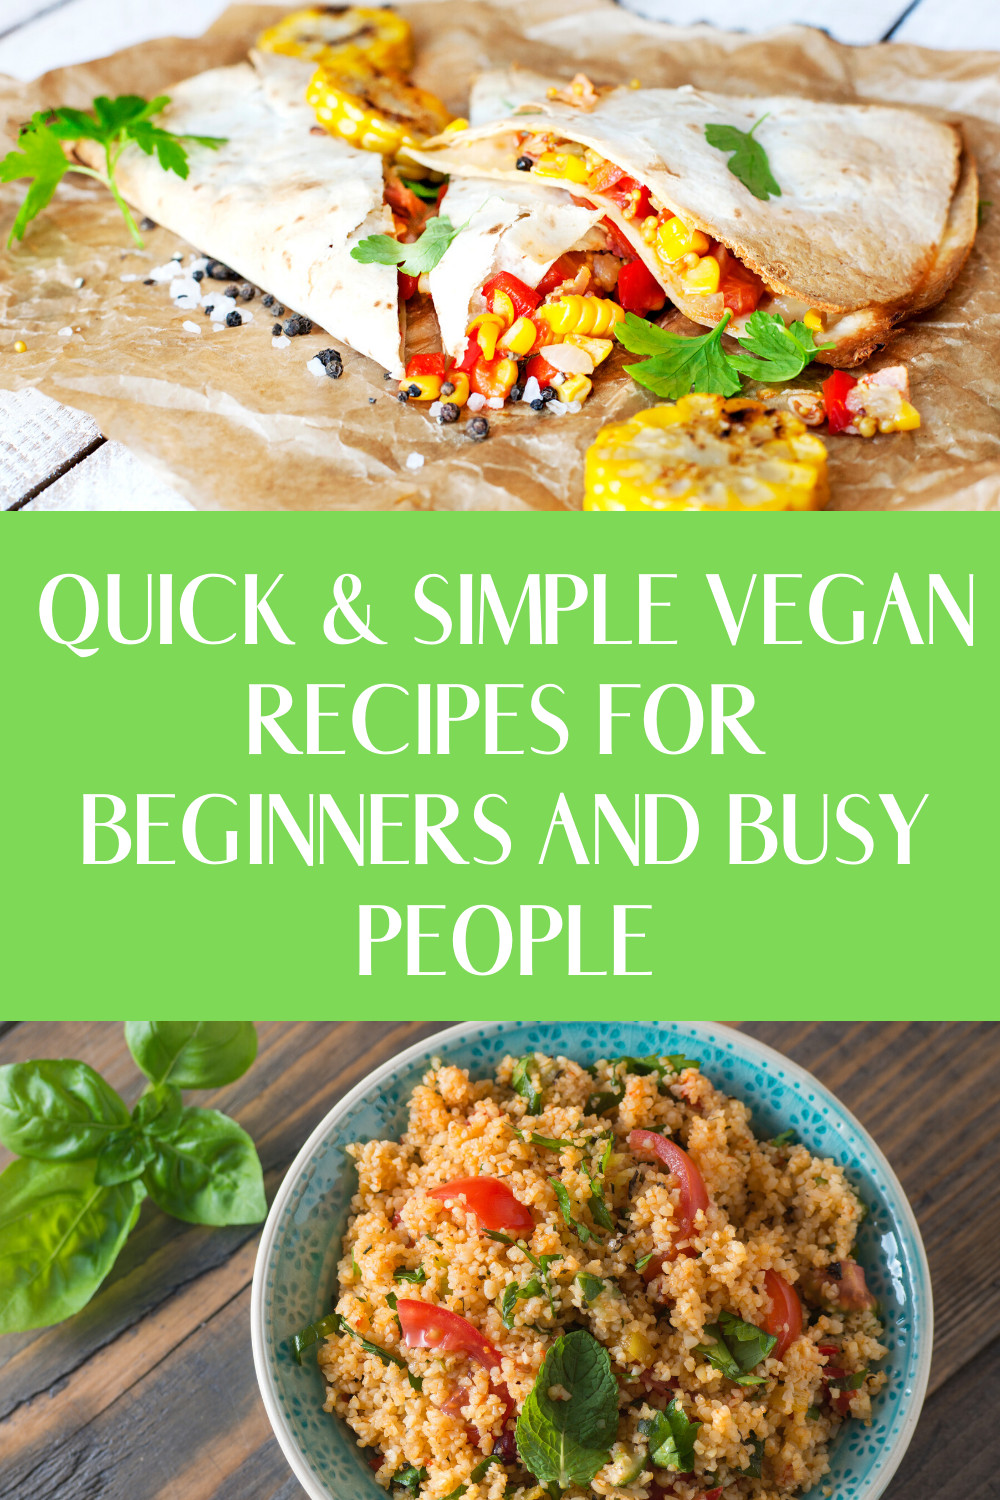 Easy Vegan Recipes For Beginners Healthy
 QUICK & SIMPLE VEGAN RECIPES FOR BEGINNERS AND BUSY PEOPLE